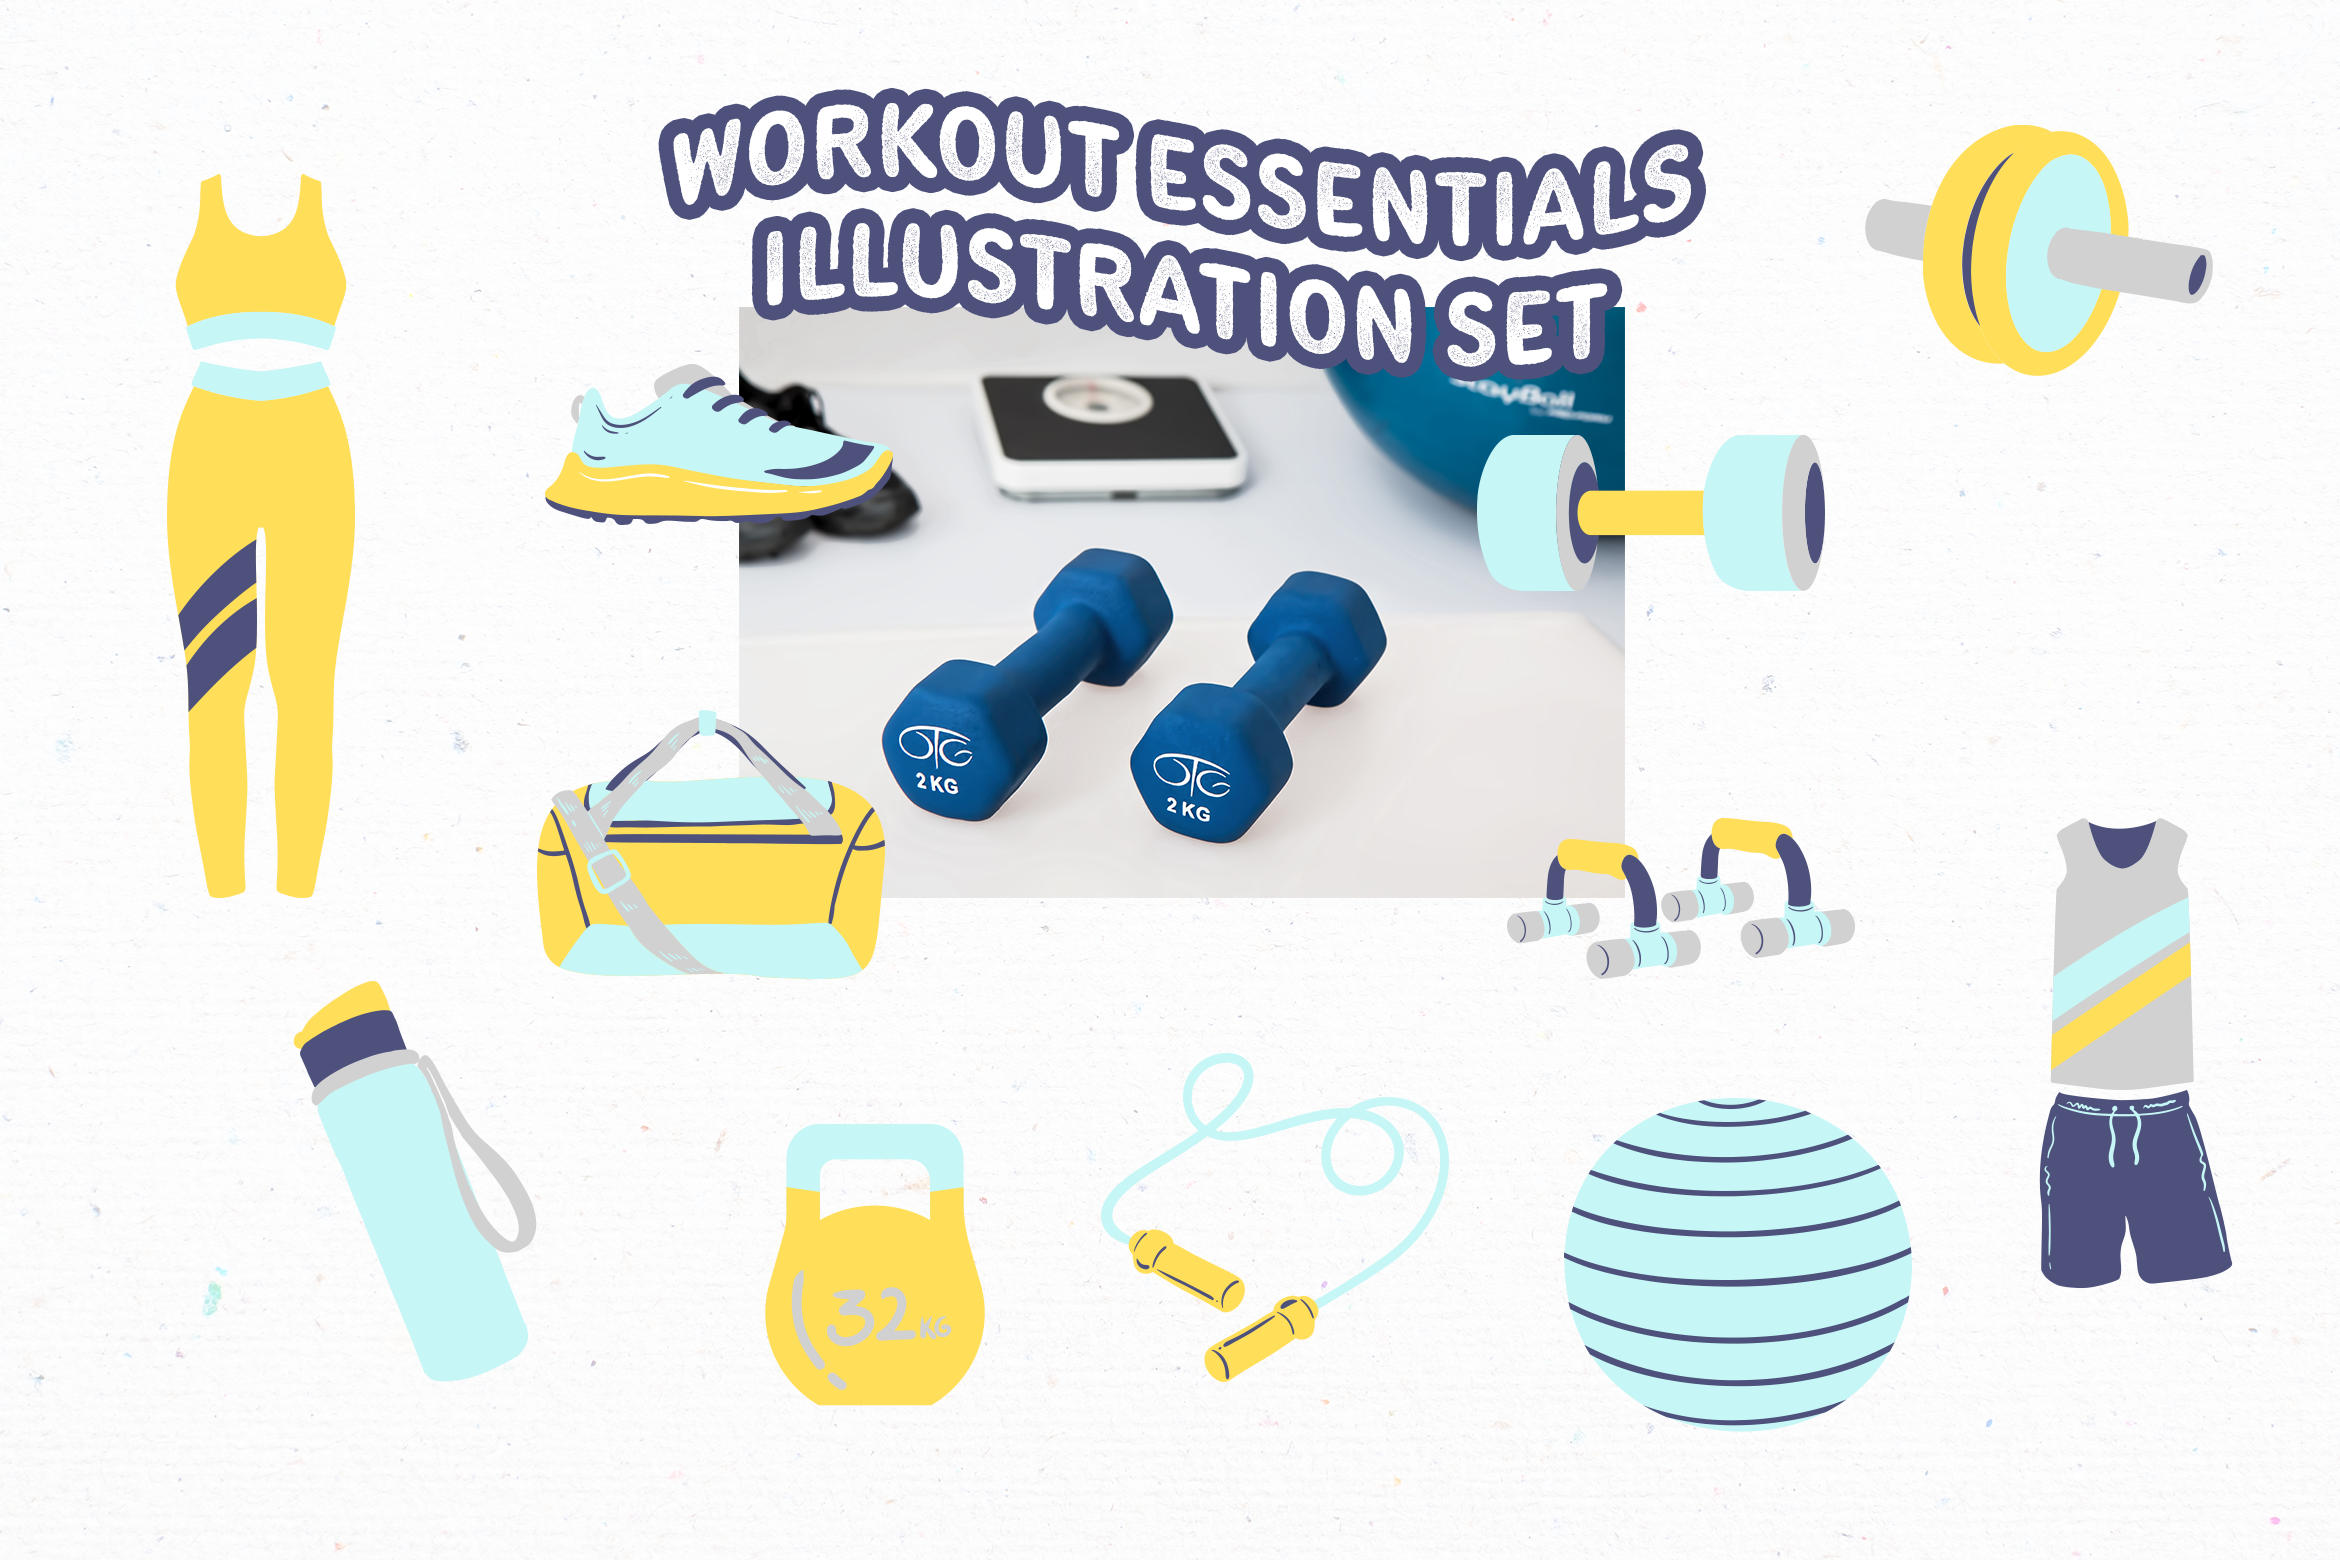 https://peterdraw.studio/wp-content/uploads/2023/03/Bright-Workout-Essentials-Illustration-Set-with-Cyan-Navy-Yellow-and-Gray-colors-5.png